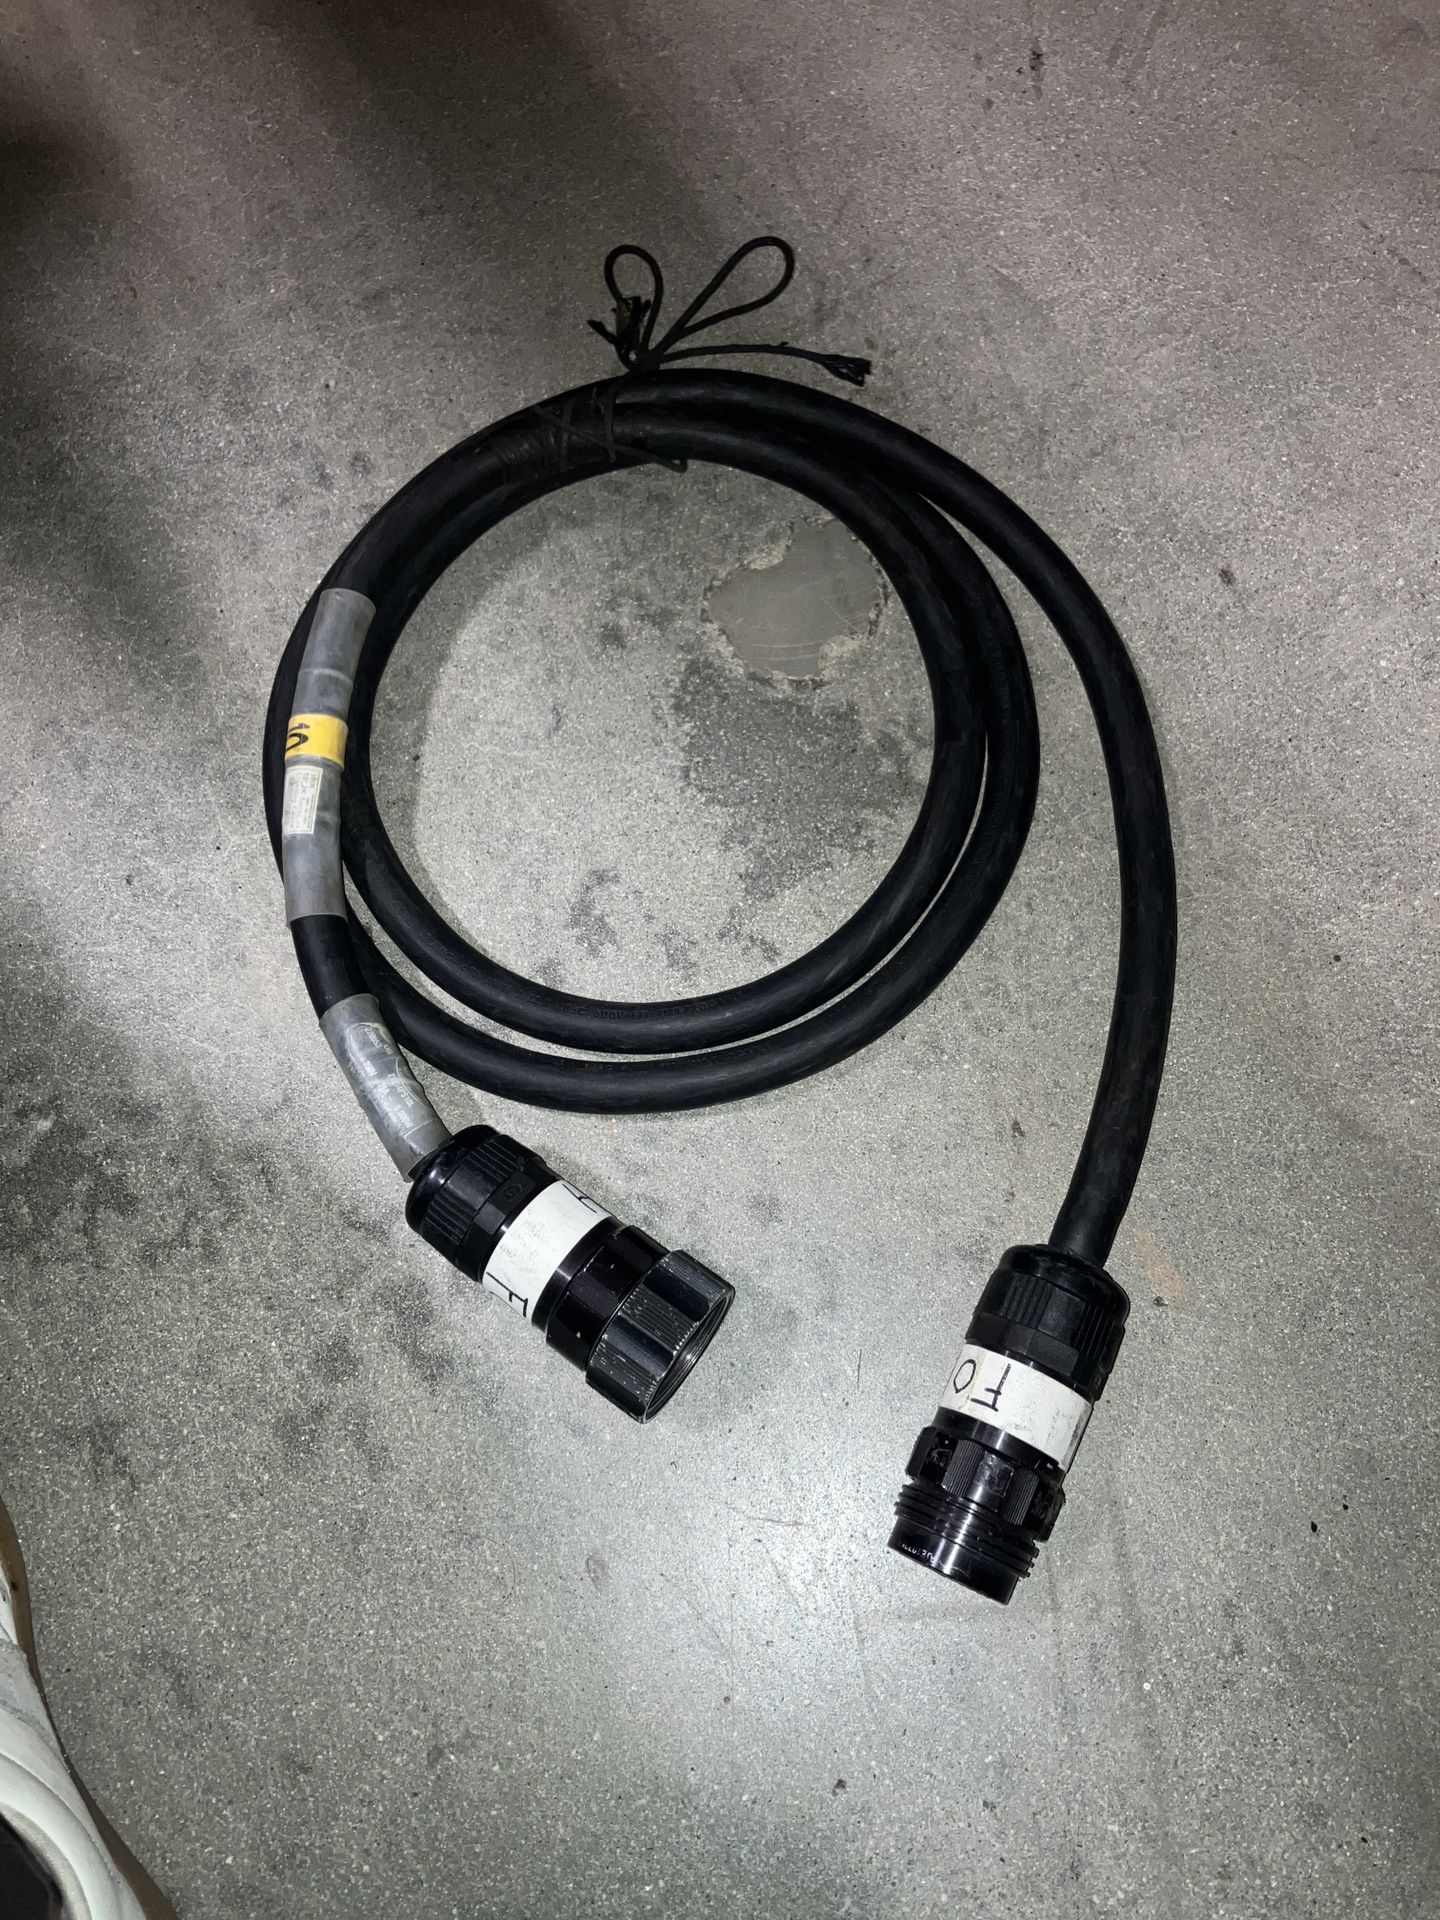 10 Ft Socapex Cable